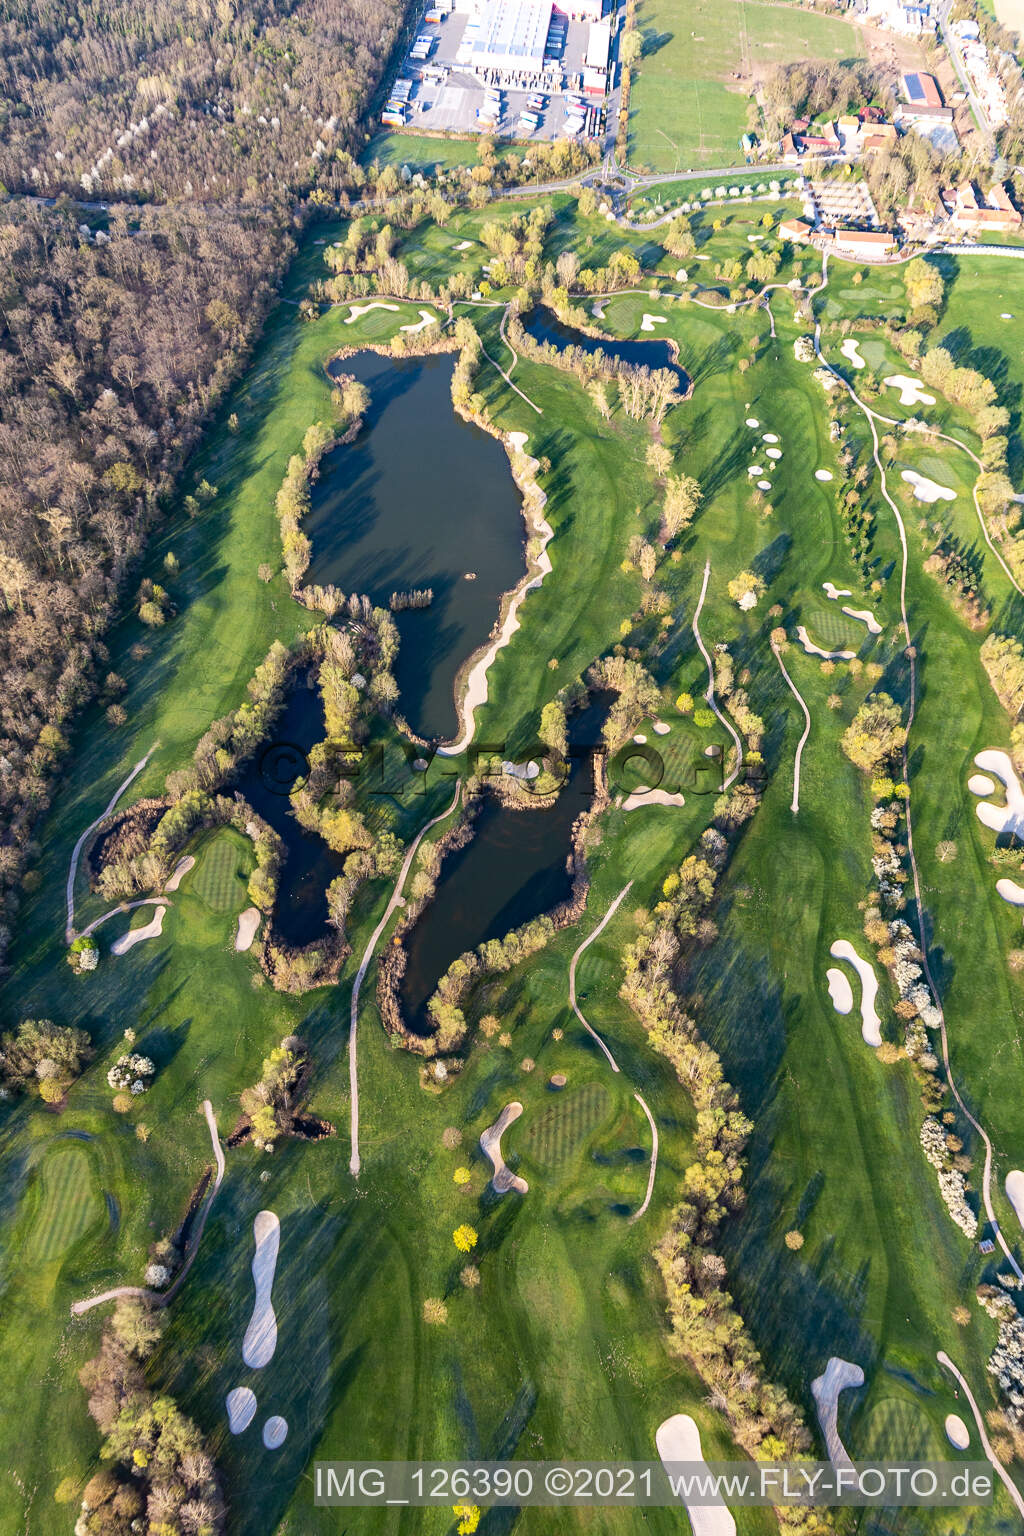 Landgut Dreihof golf course - GOLF Absolute in Essingen in the state Rhineland-Palatinate, Germany from above